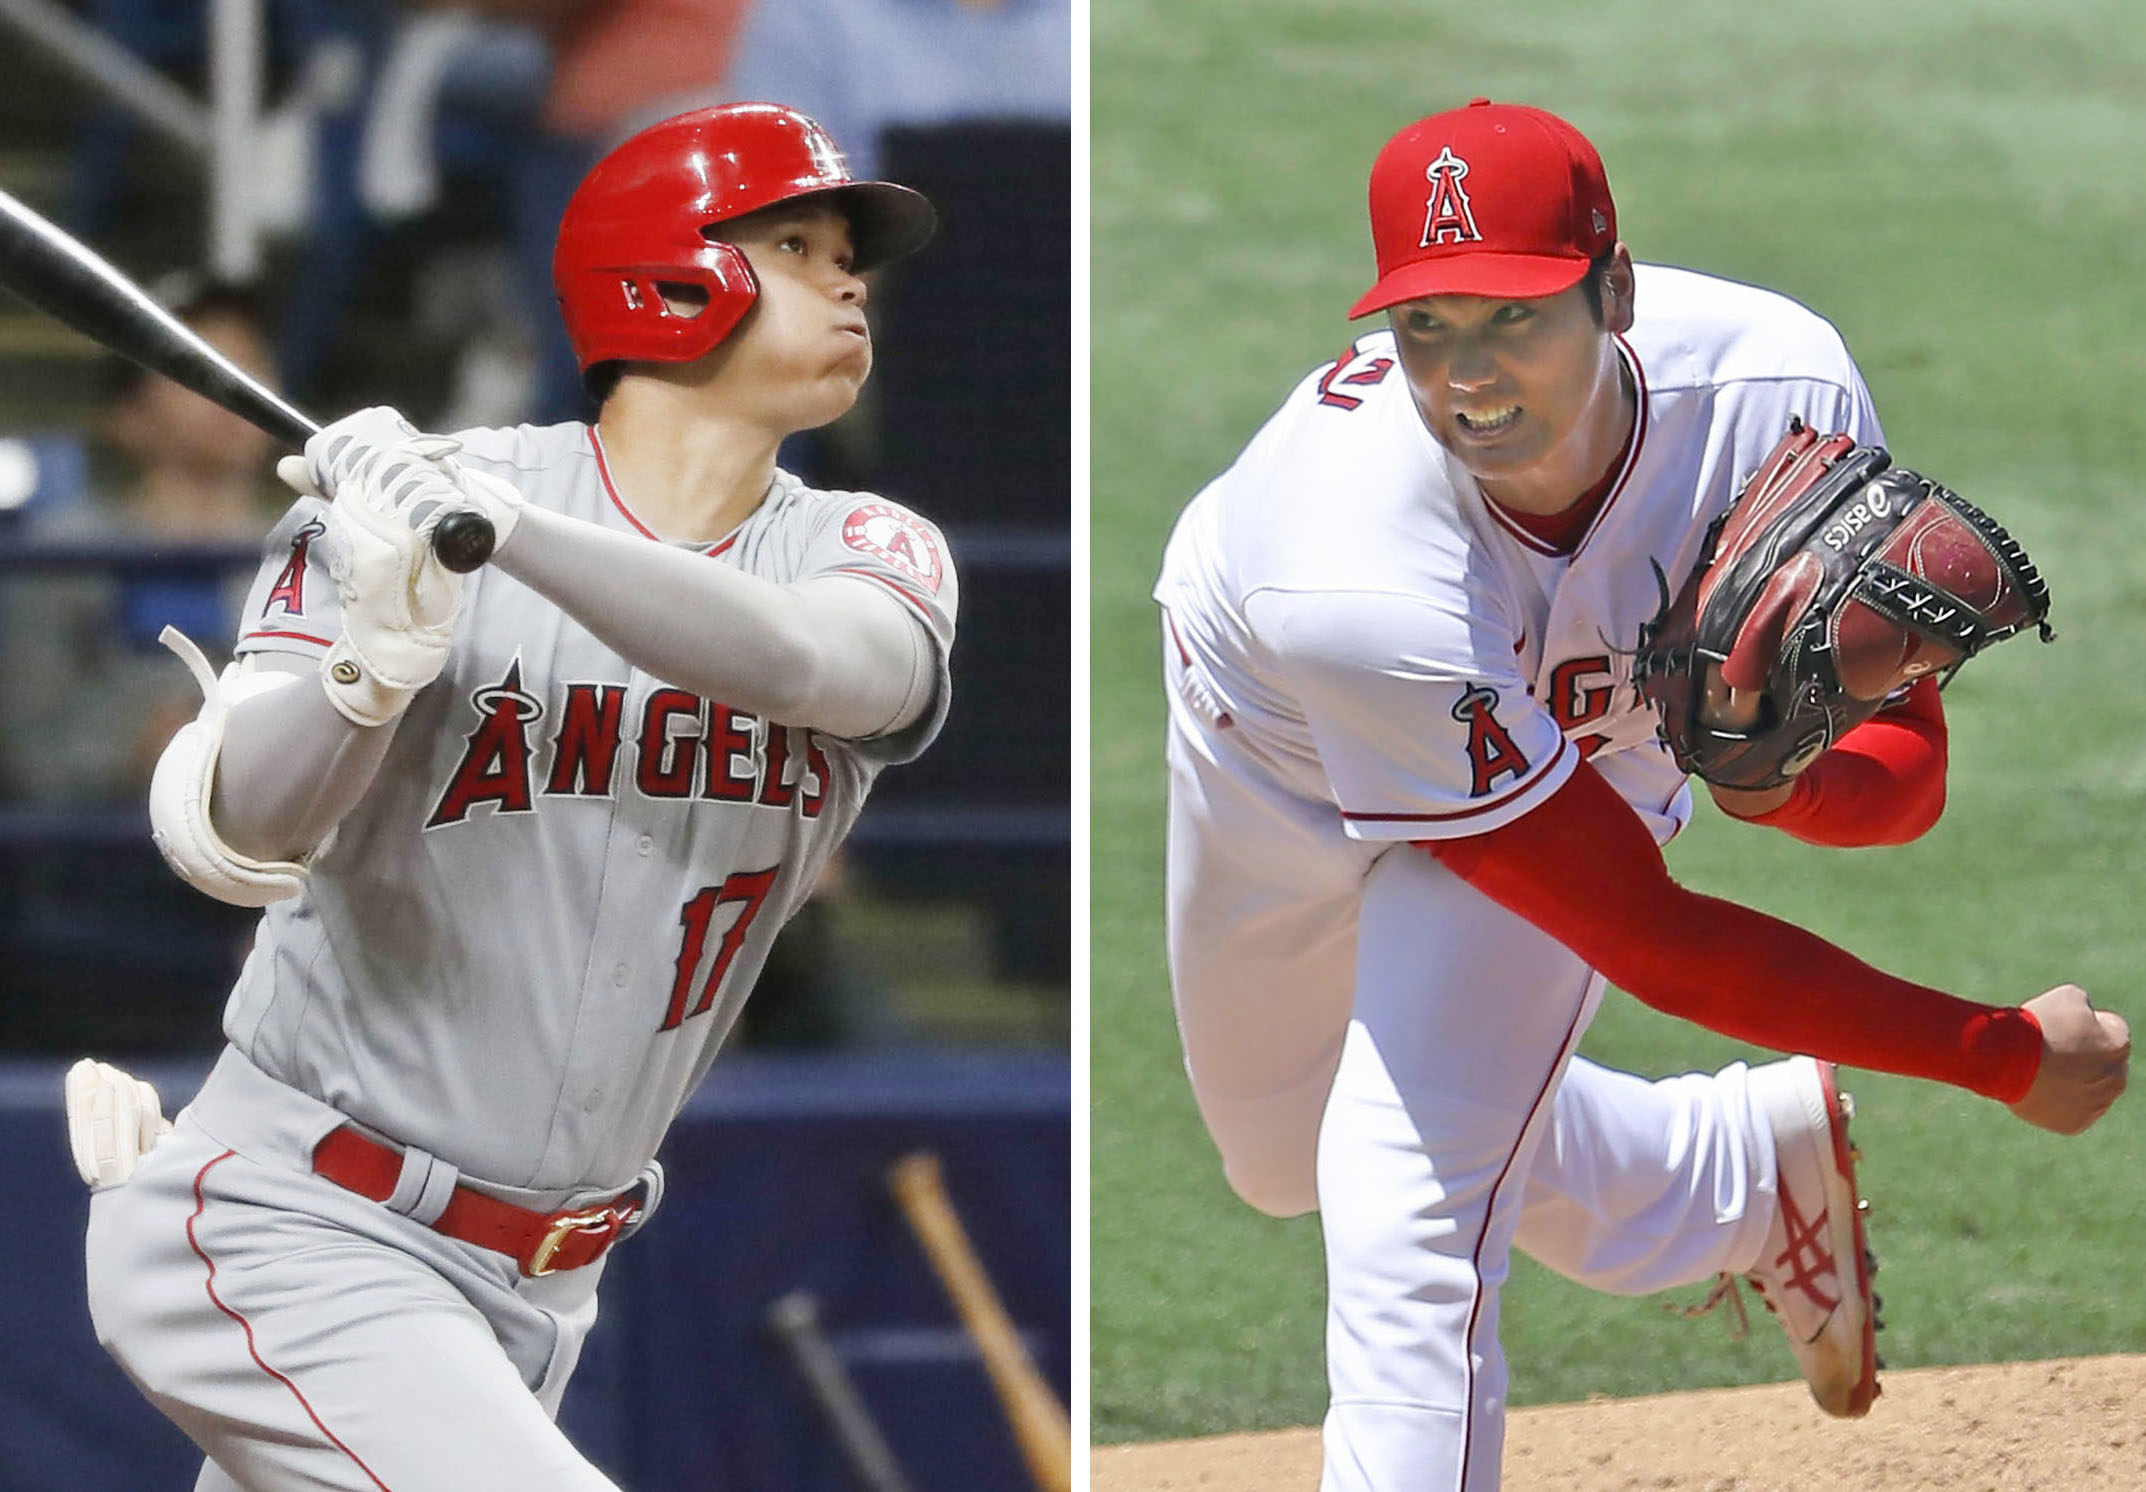 Shohei Ohtani: the two-way Japanese marvel with once-in-a-century